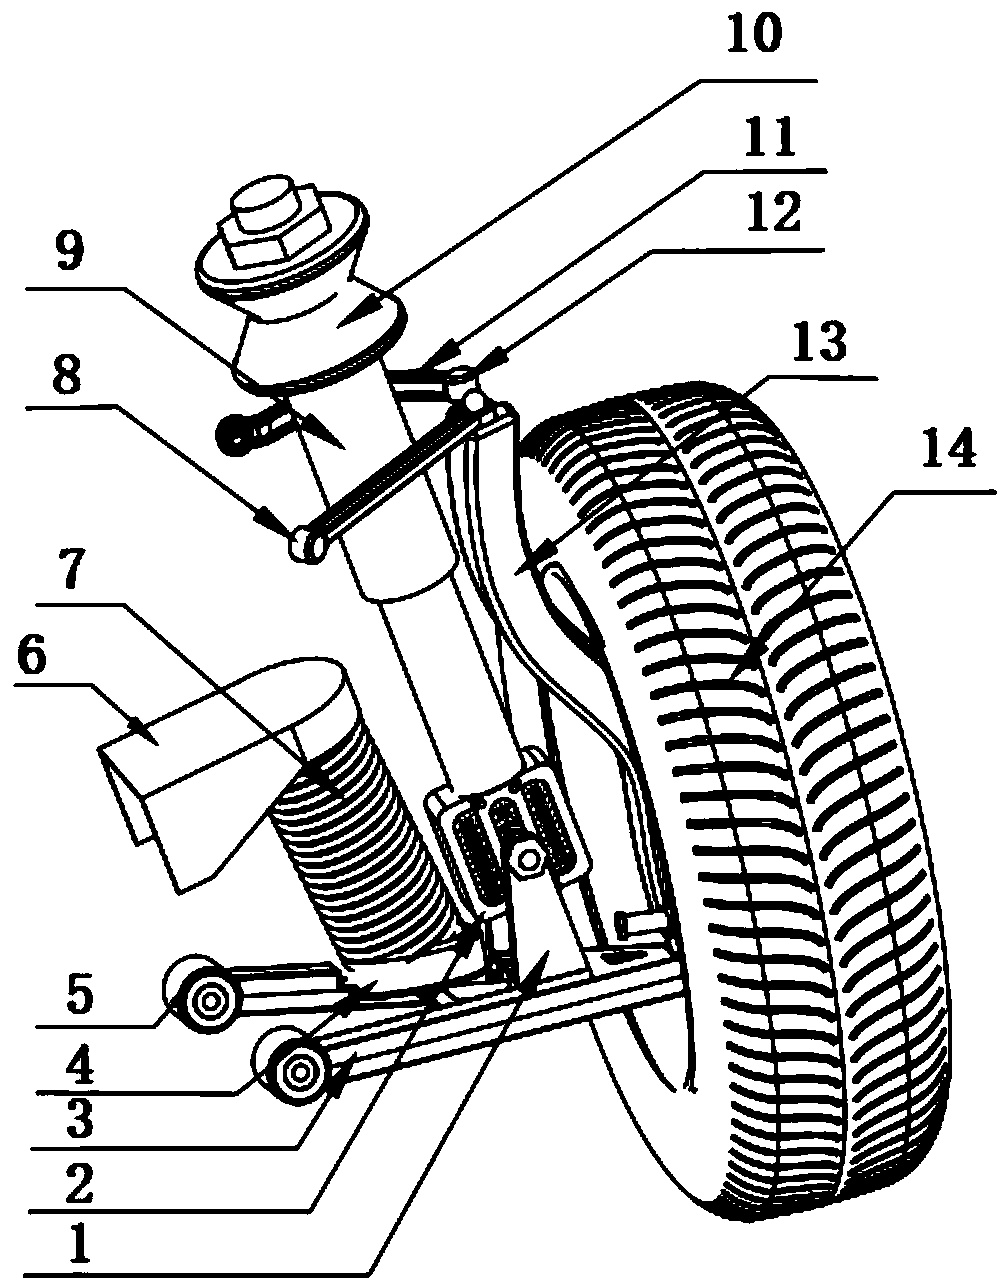 Active suspension having spiral spring and rubber spring non-concentric with each other